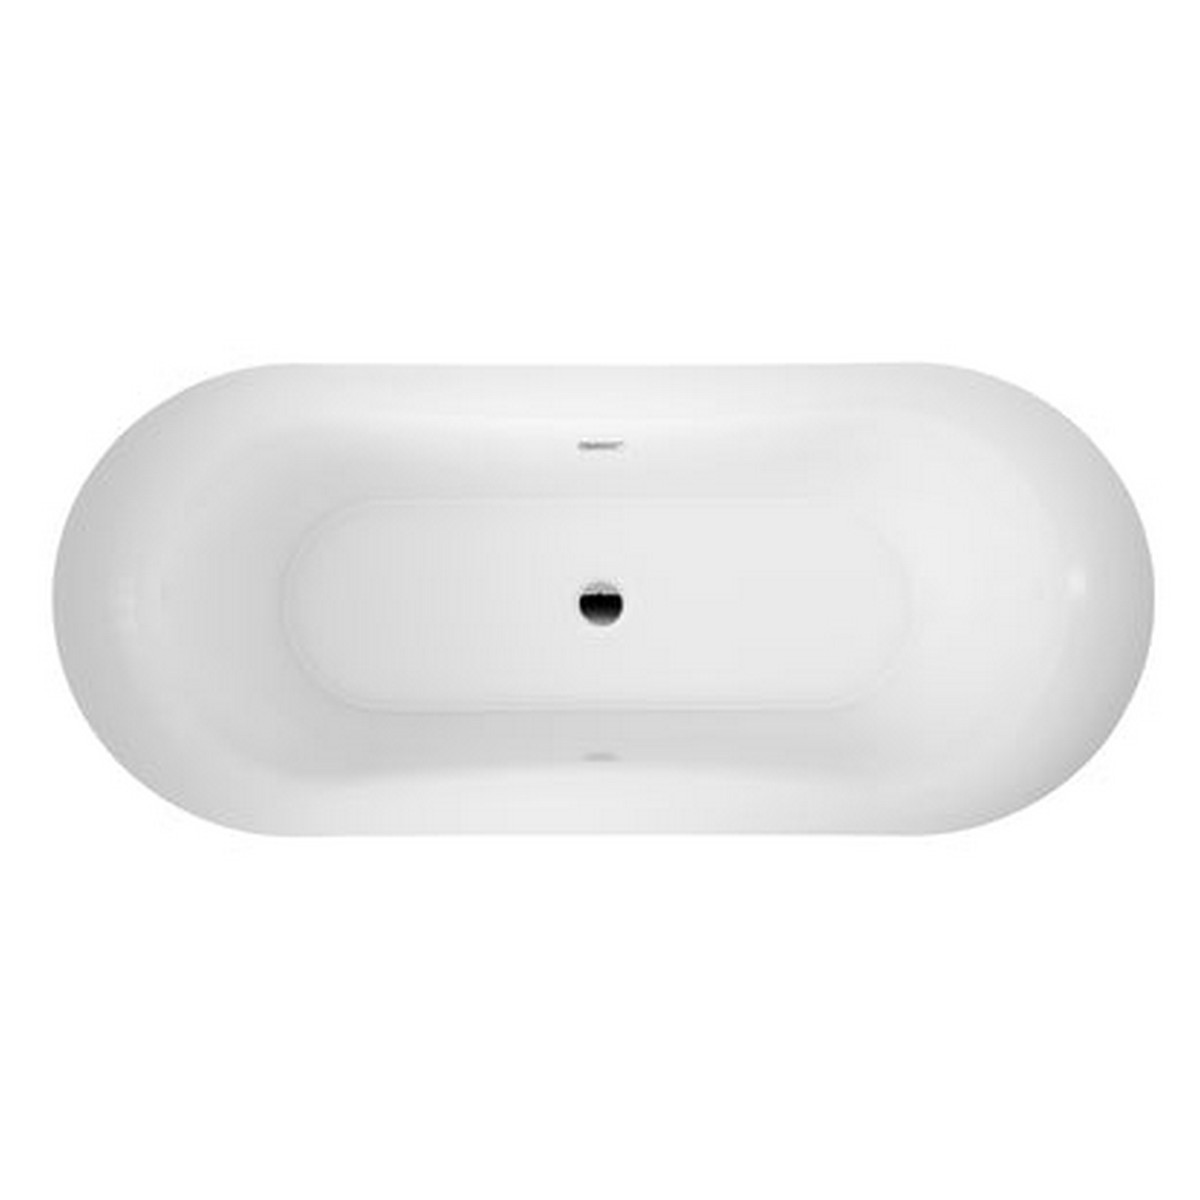 BARCLAY ATFDSN72IG NYDIA 72 INCH ACRYLIC FREESTANDING OVAL SOAKING DOUBLE SLIPPER BATHTUB IN WHITE WITH INTEGRAL DRAIN AND OVERFLOW